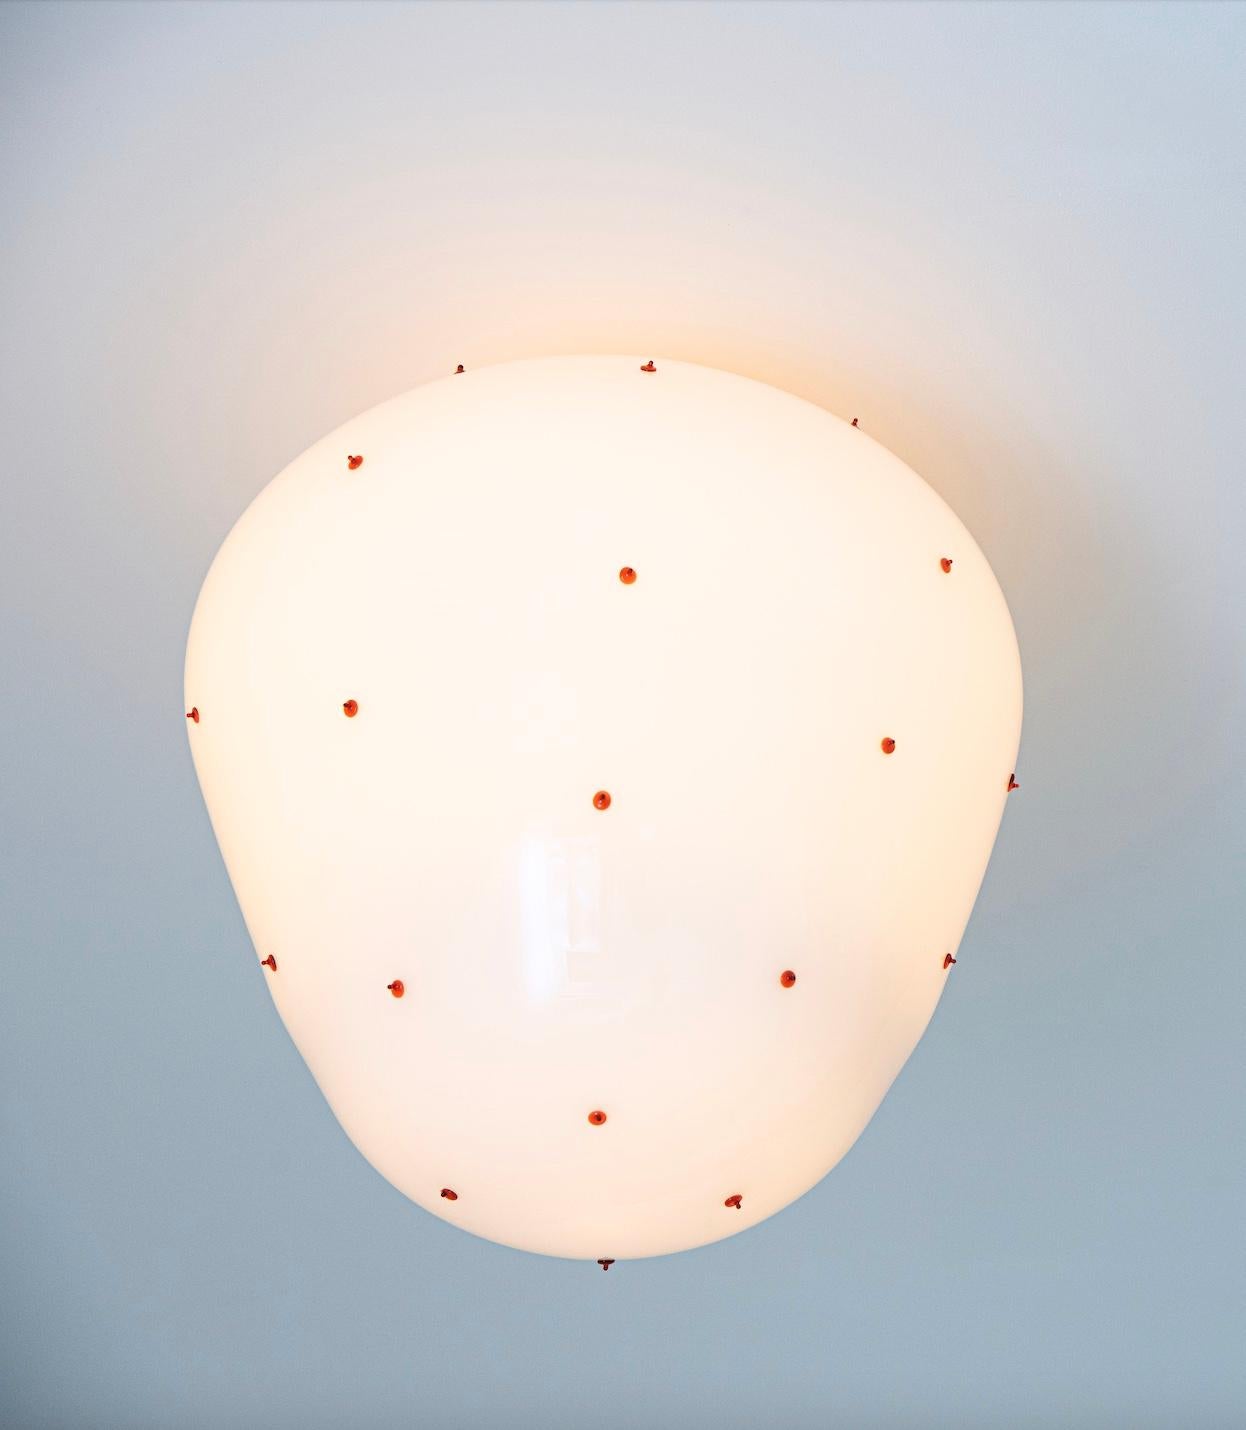 Berries blown glass wall light designed by French designer Duo Marie & Alexandre.

The Berries collection is handblown in Paris by a master glassblower, patiently handblown without the use of molds.
This meticulous process allows for subtle